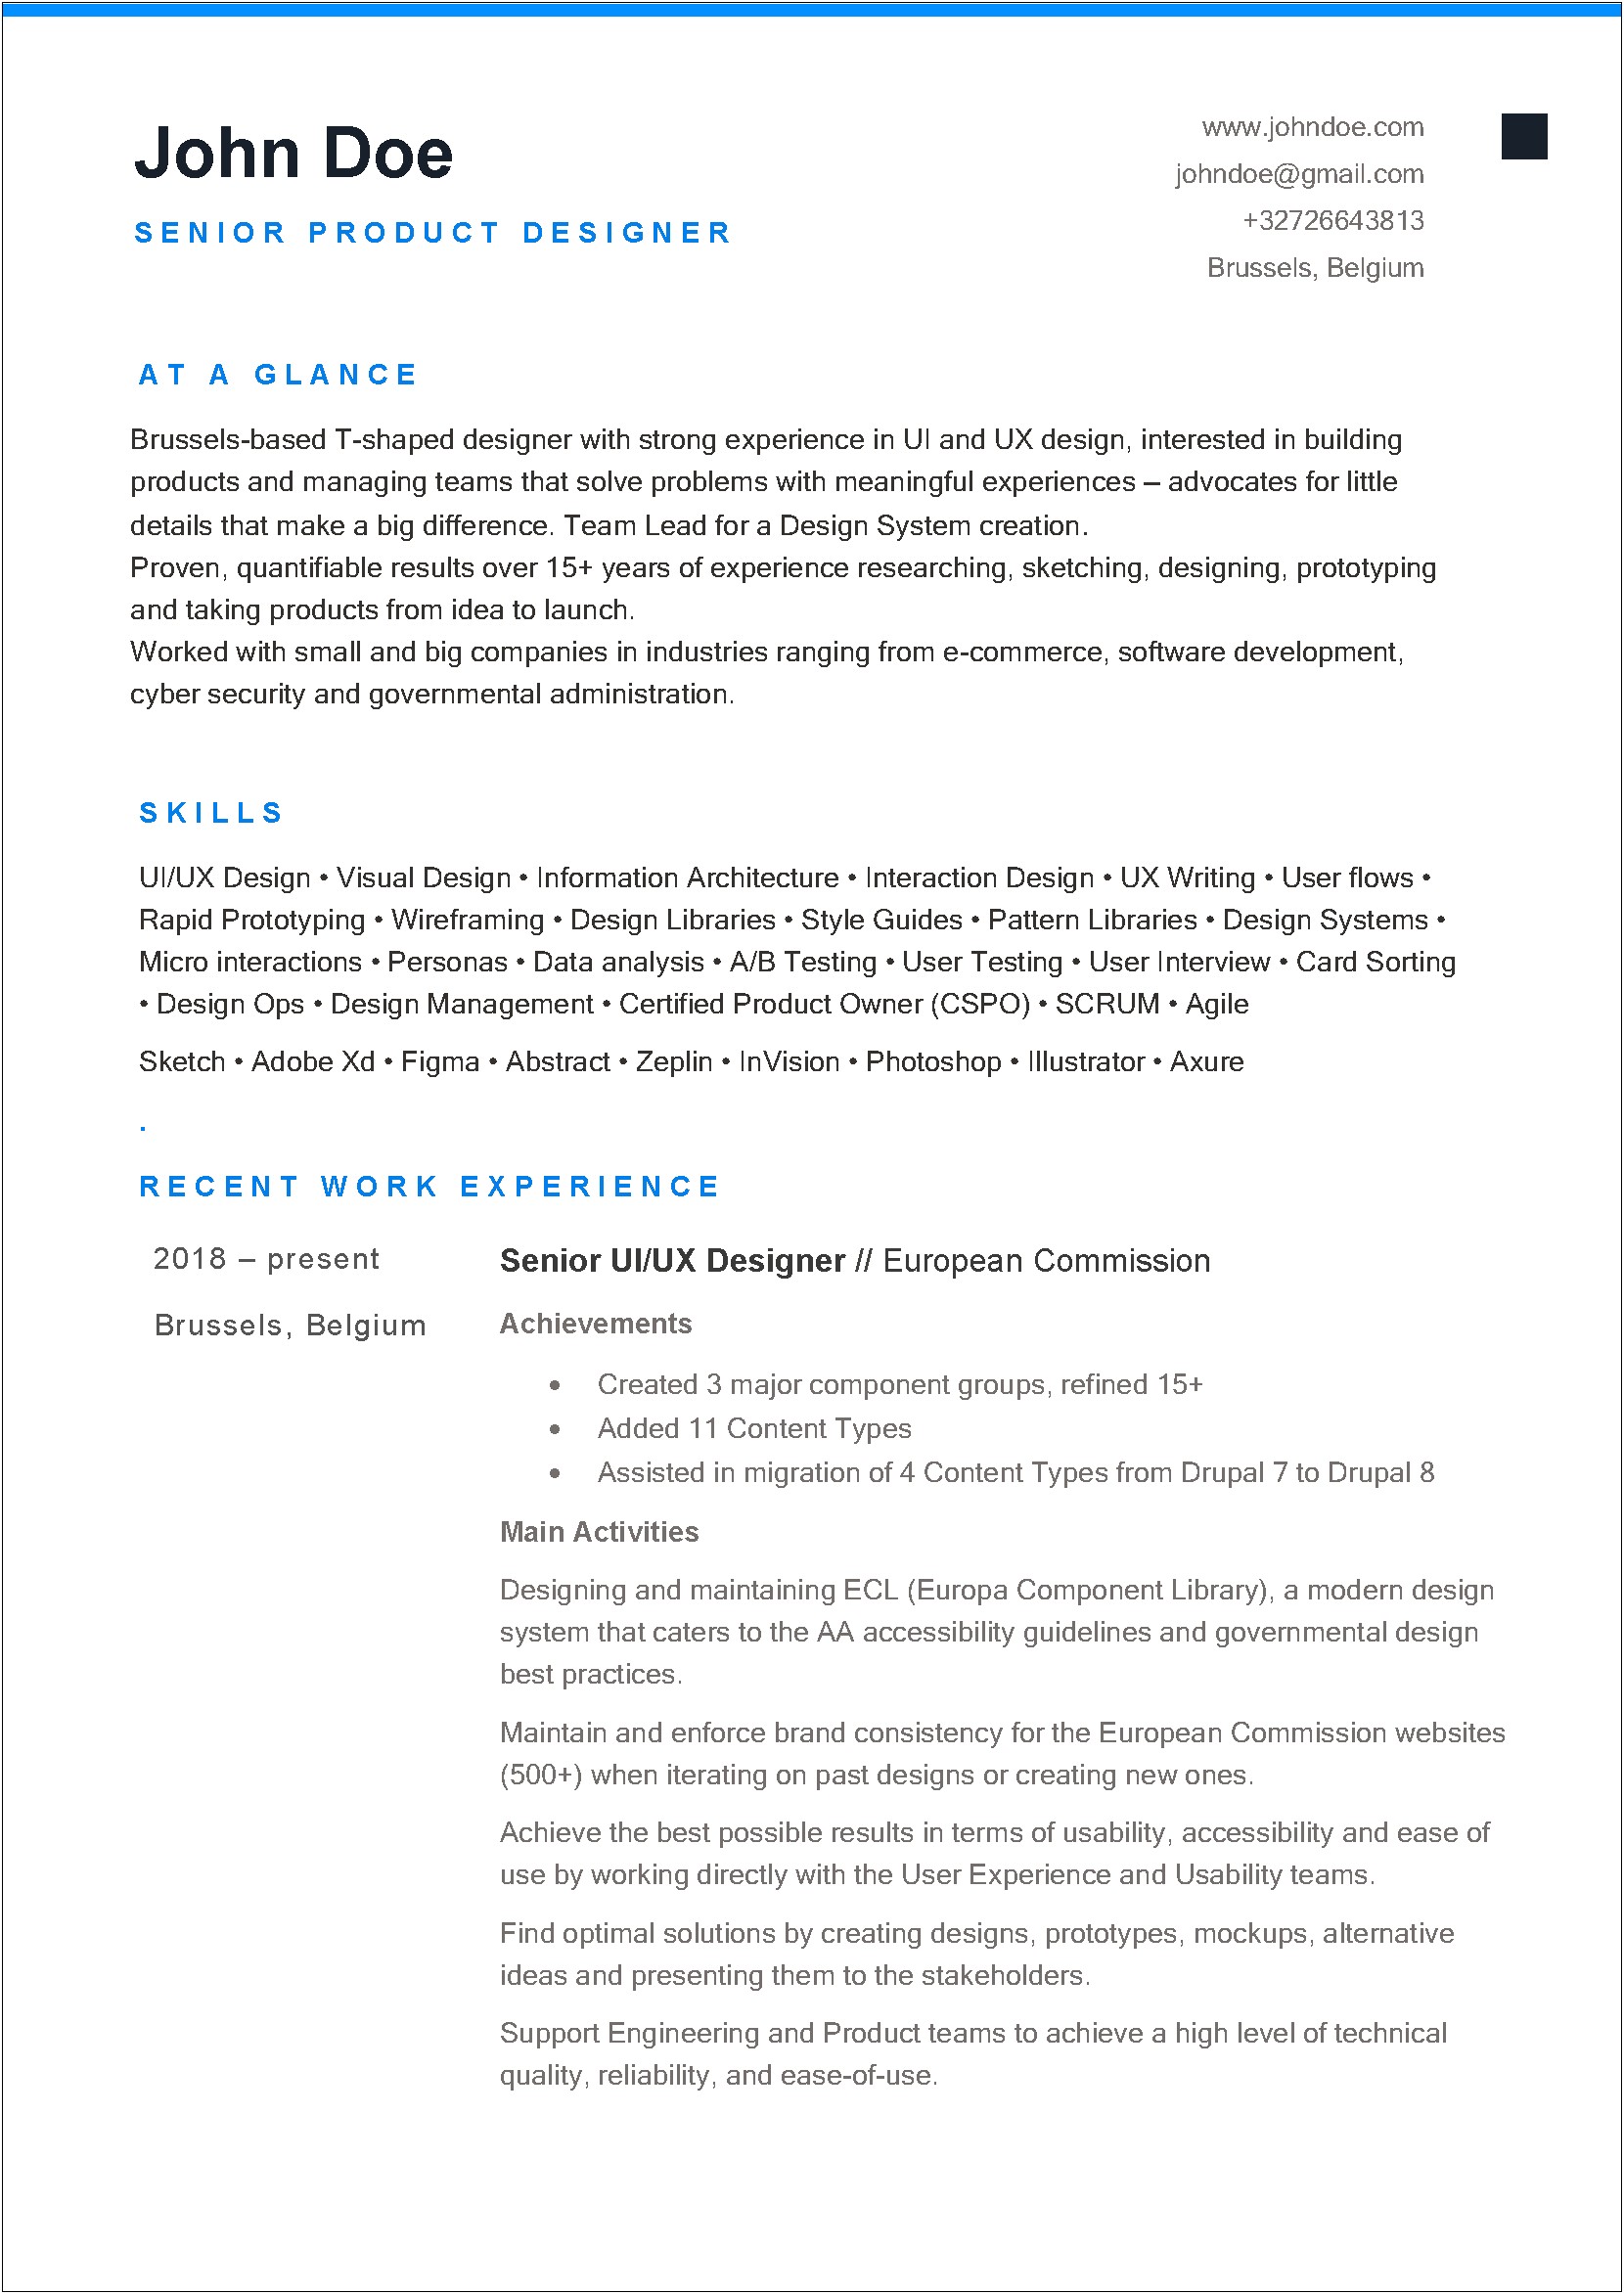 Resume Alternatives To The Word Design